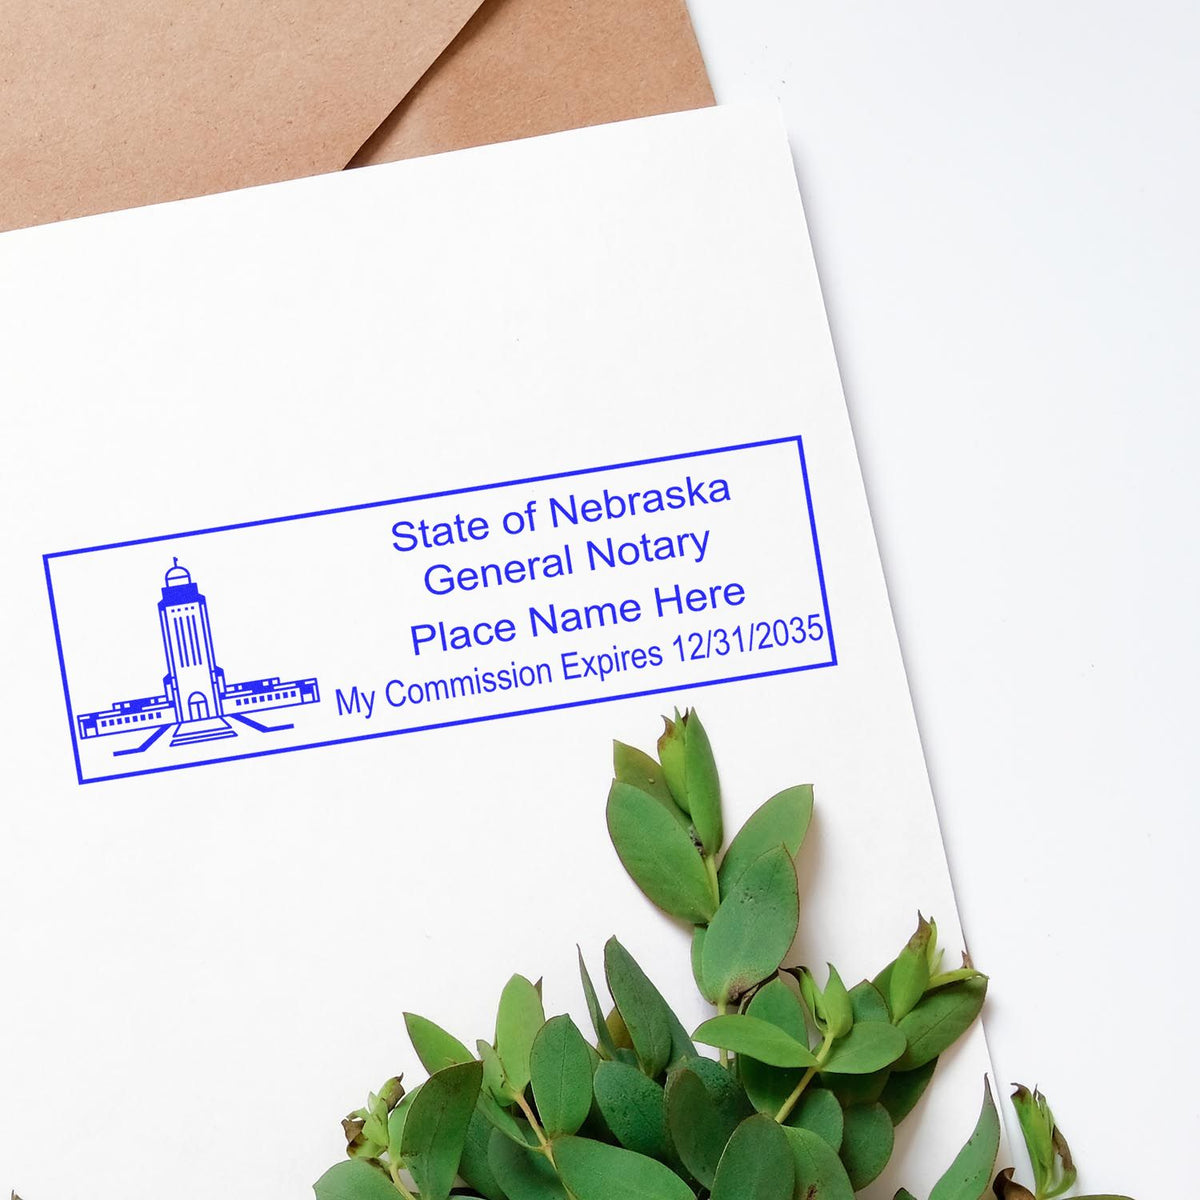 This paper is stamped with a sample imprint of the Wooden Handle Nebraska State Seal Notary Public Stamp, signifying its quality and reliability.